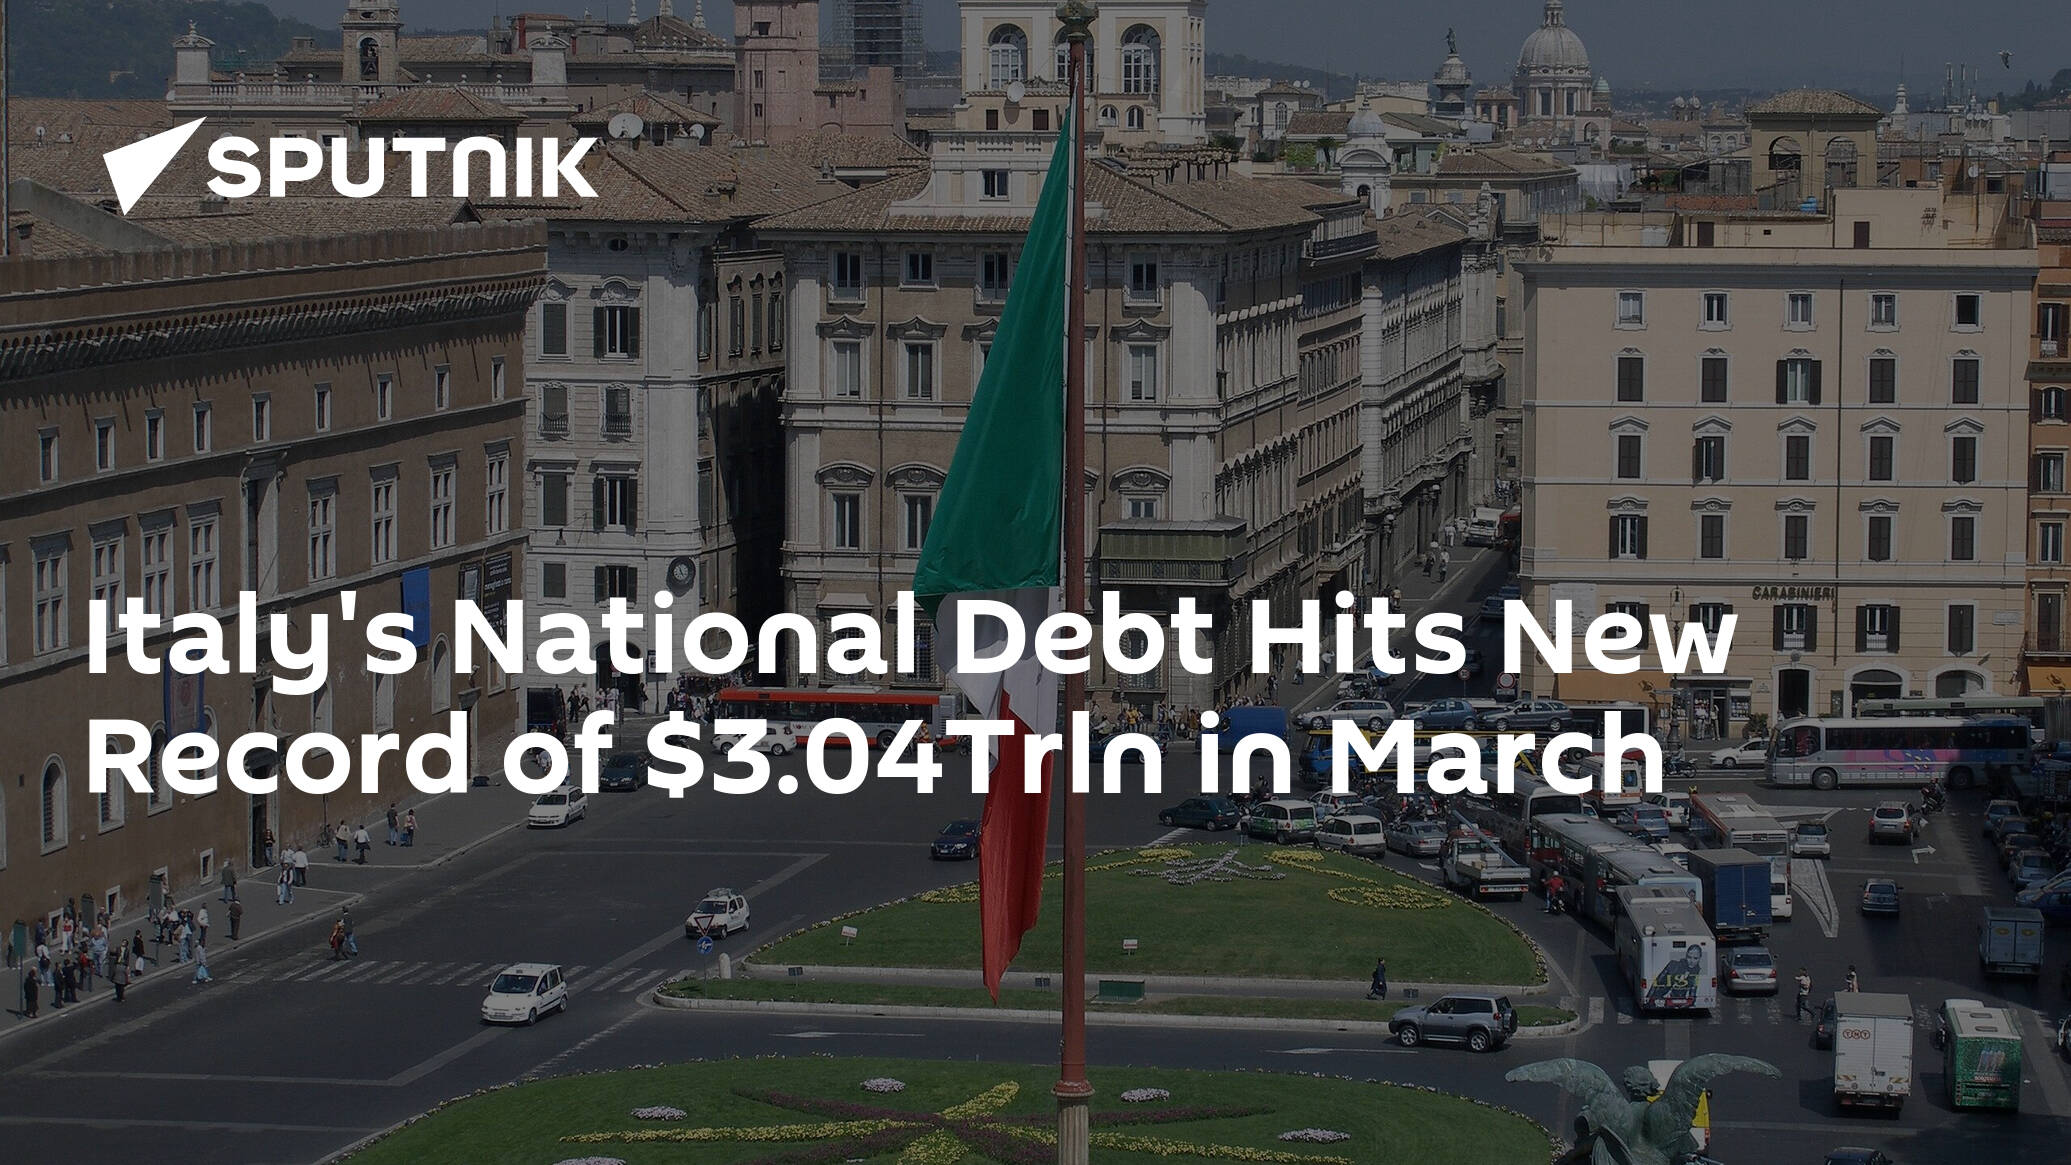 Italy's National Debt Hits New Record of .04Trln in March